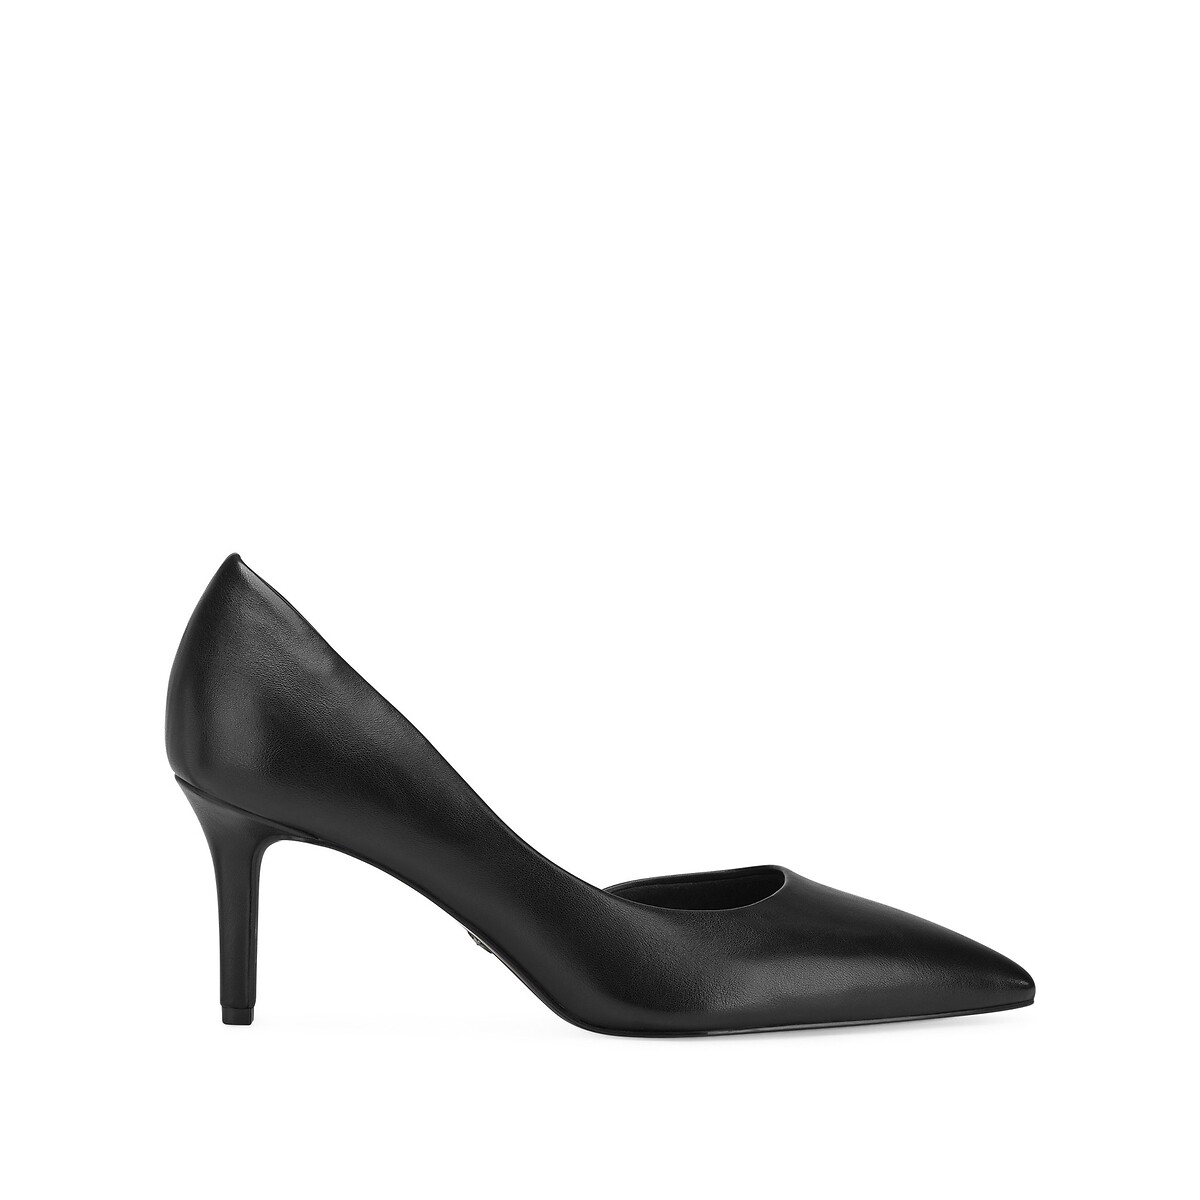 Image of Asymmetric Cut Out Heels